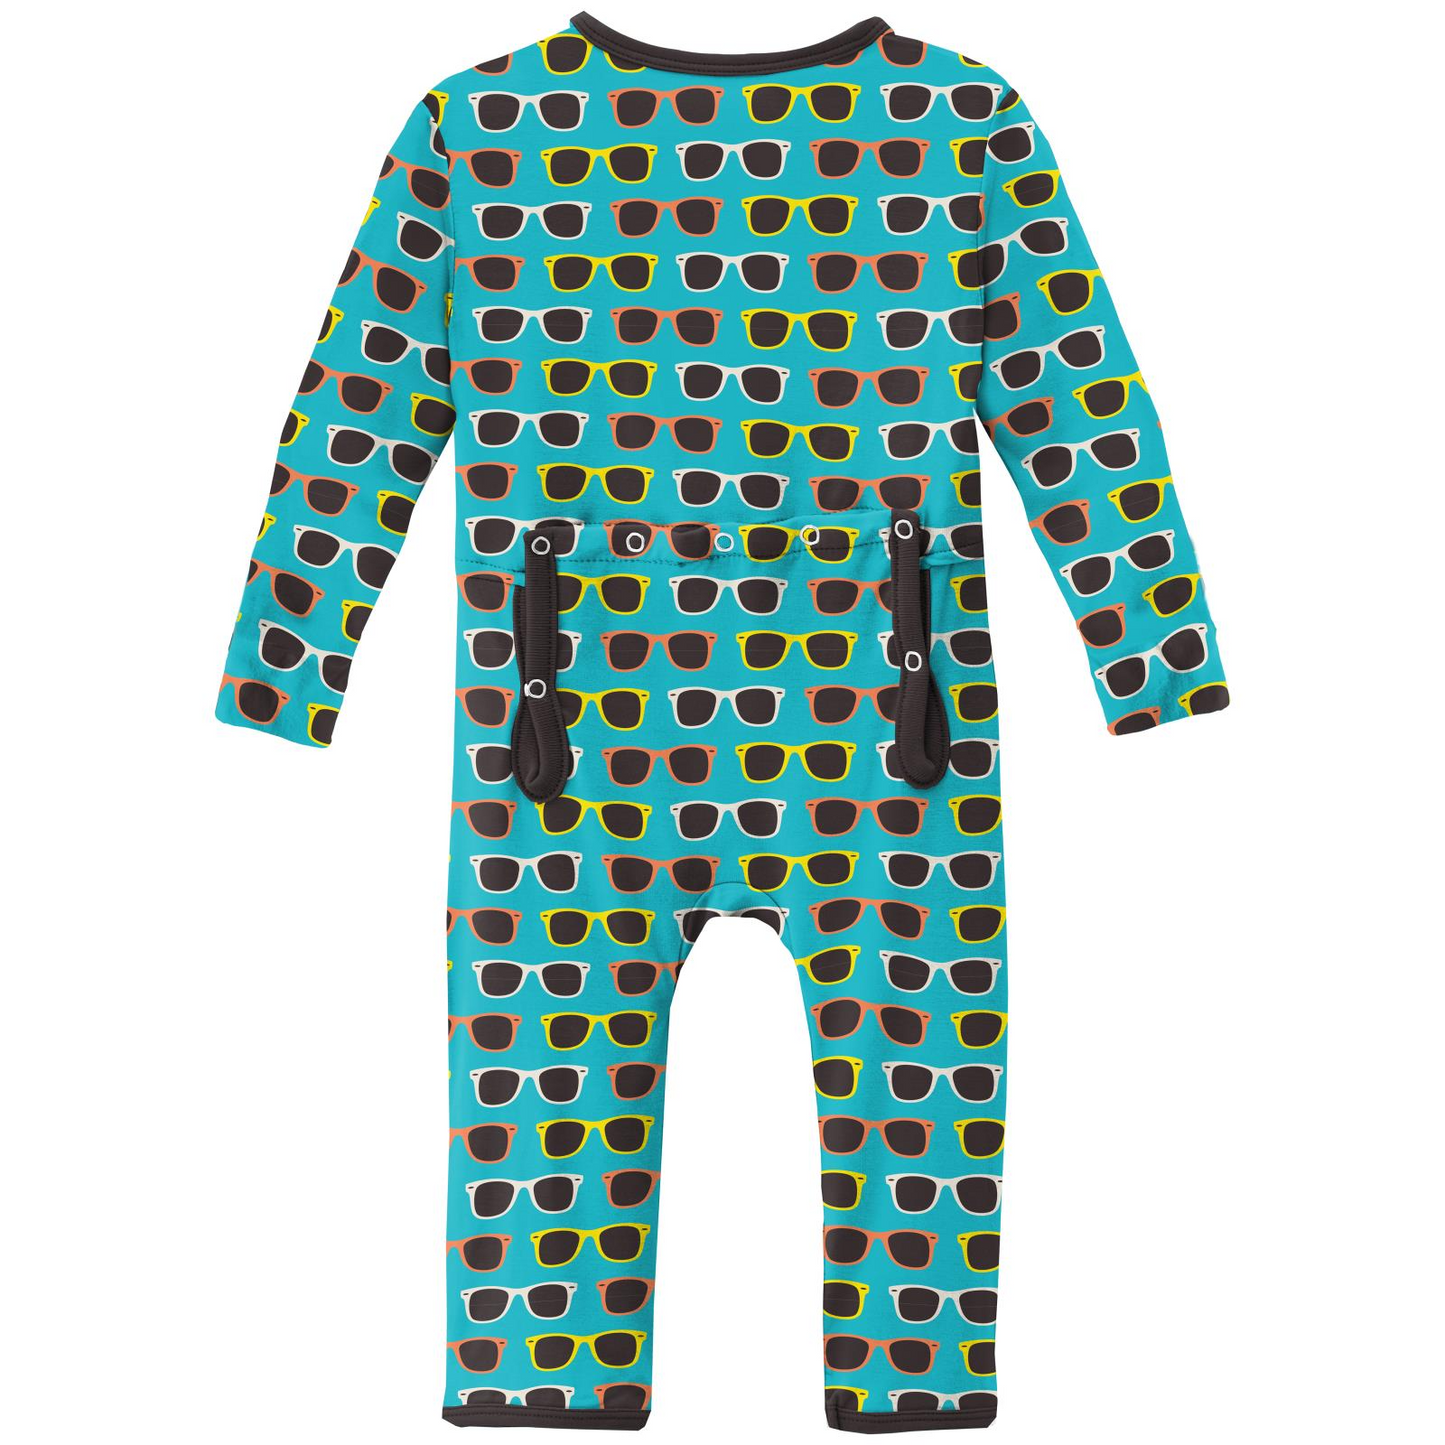 Kickee Pants Print Coverall with Snaps: Confetti Sunglasses